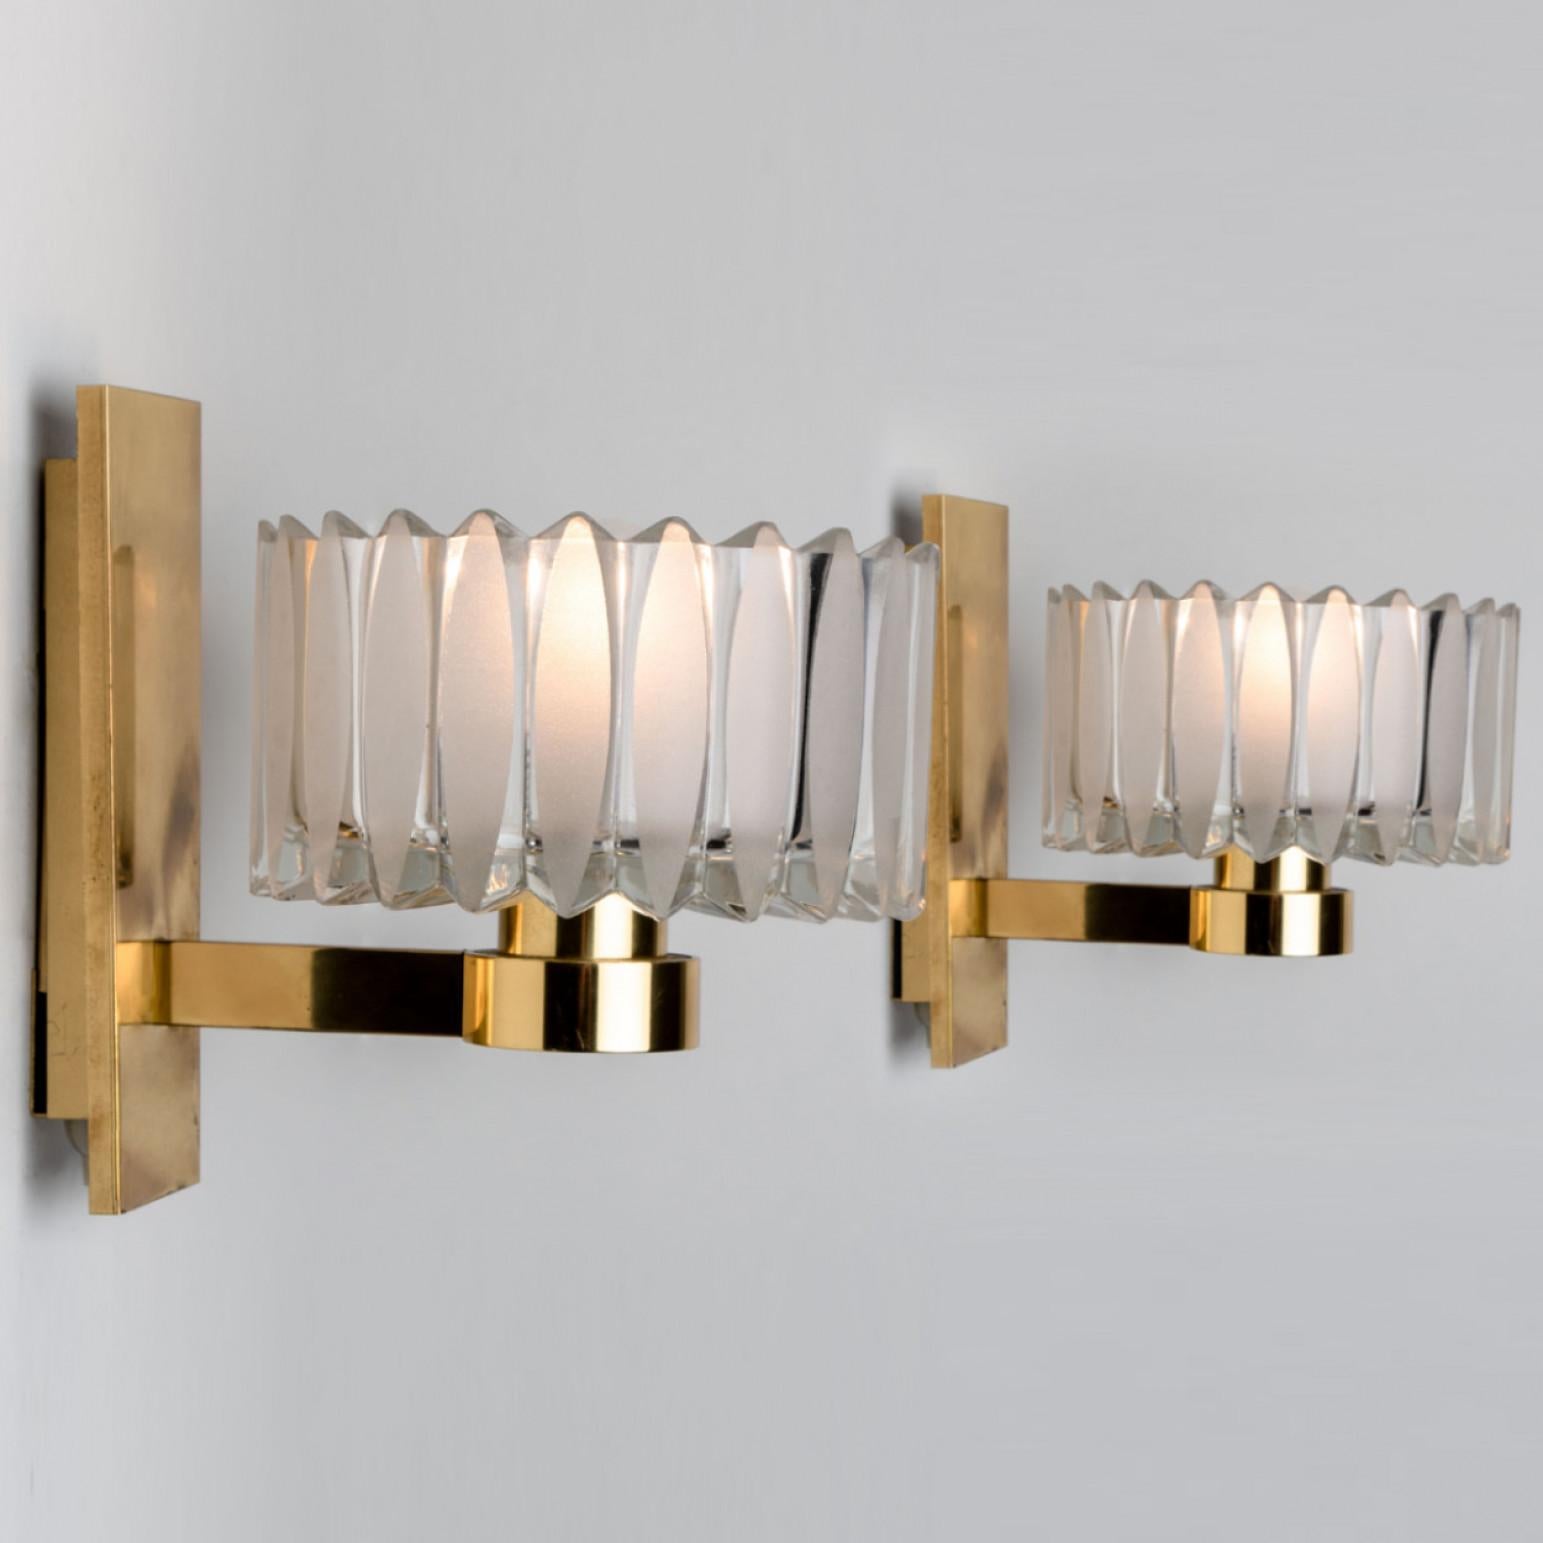 Clean lines to complement all decors. A wonderful high-end Hillebrand wall light fixture with an ellipse shaped pattern glass and brass details.
Designed and manufactured in the 1970s in Germany, Europe.

Each wall sconce holds 1 E14 socket.

Please